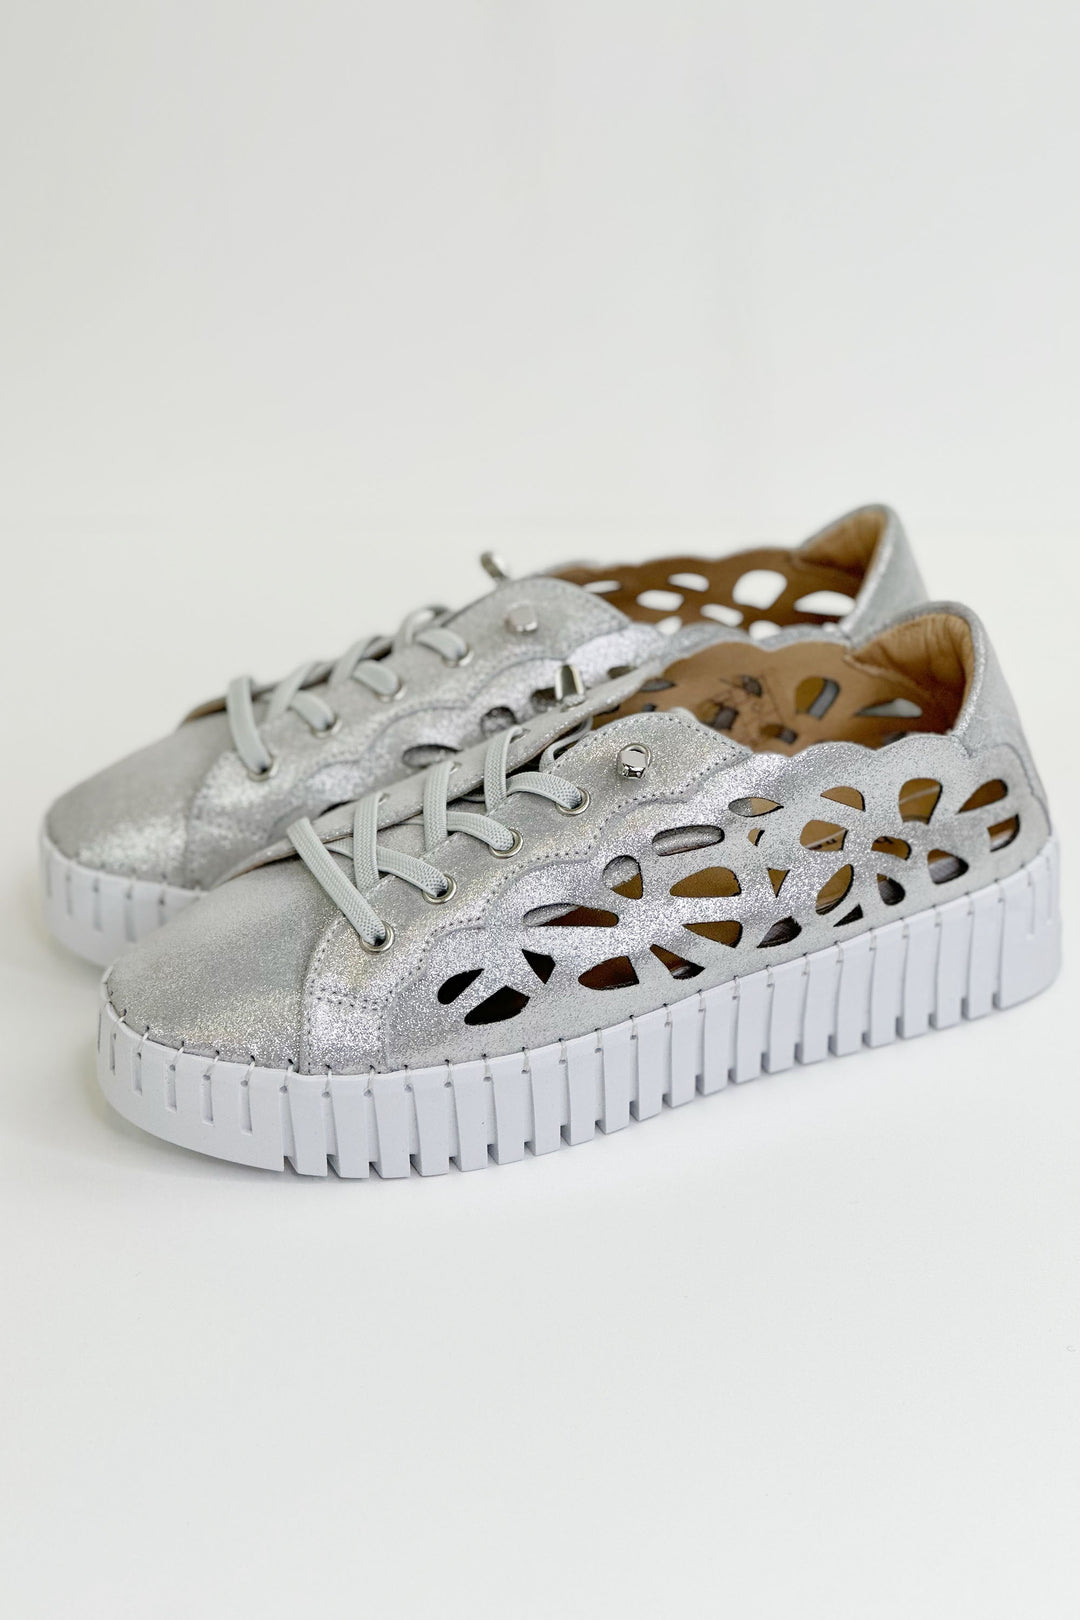 Bernie Mev Spring 2024 This stunning slip-on sneaker features a stretchy knit upper,<span data-mce-fragment="1"> sparkle shine finish</span><span data-mce-fragment="1">,</span><span data-mce-fragment="1"> eyelet</span> siding design pattern, lace up details and Bernie Mev’s signature memory foam footbed.